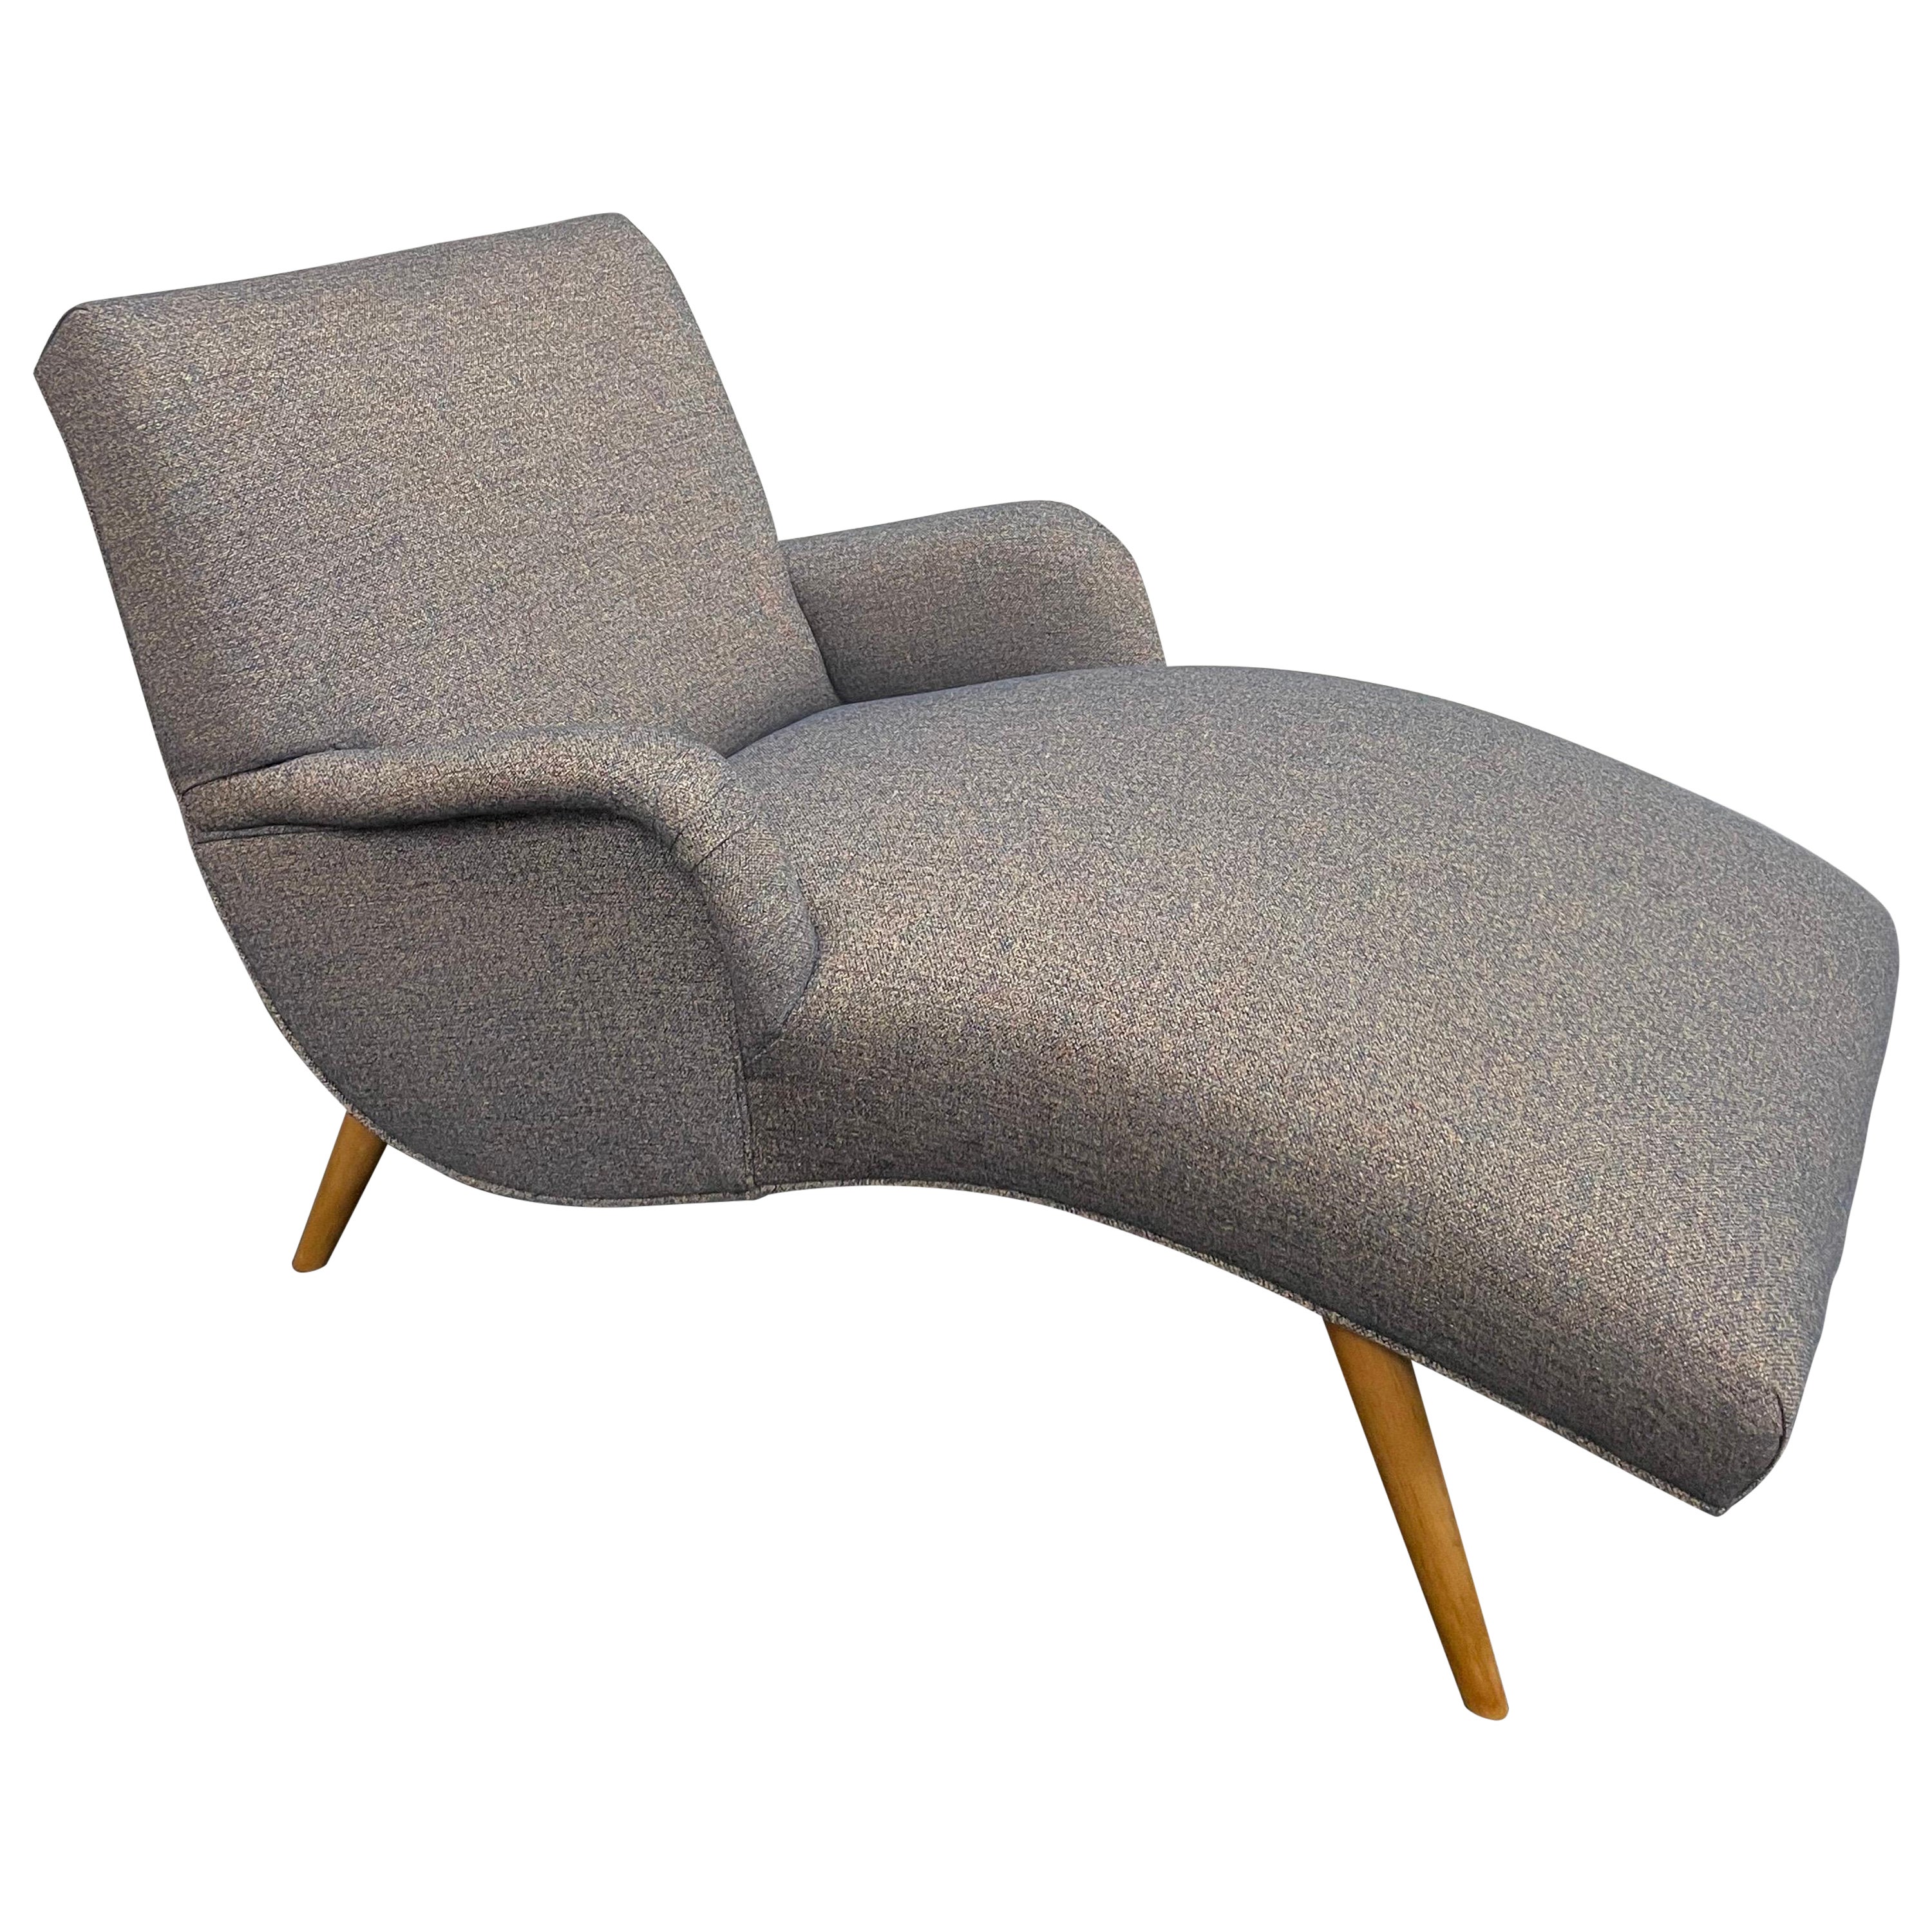 Chaise Lounge Chair by Heywood Wakefield